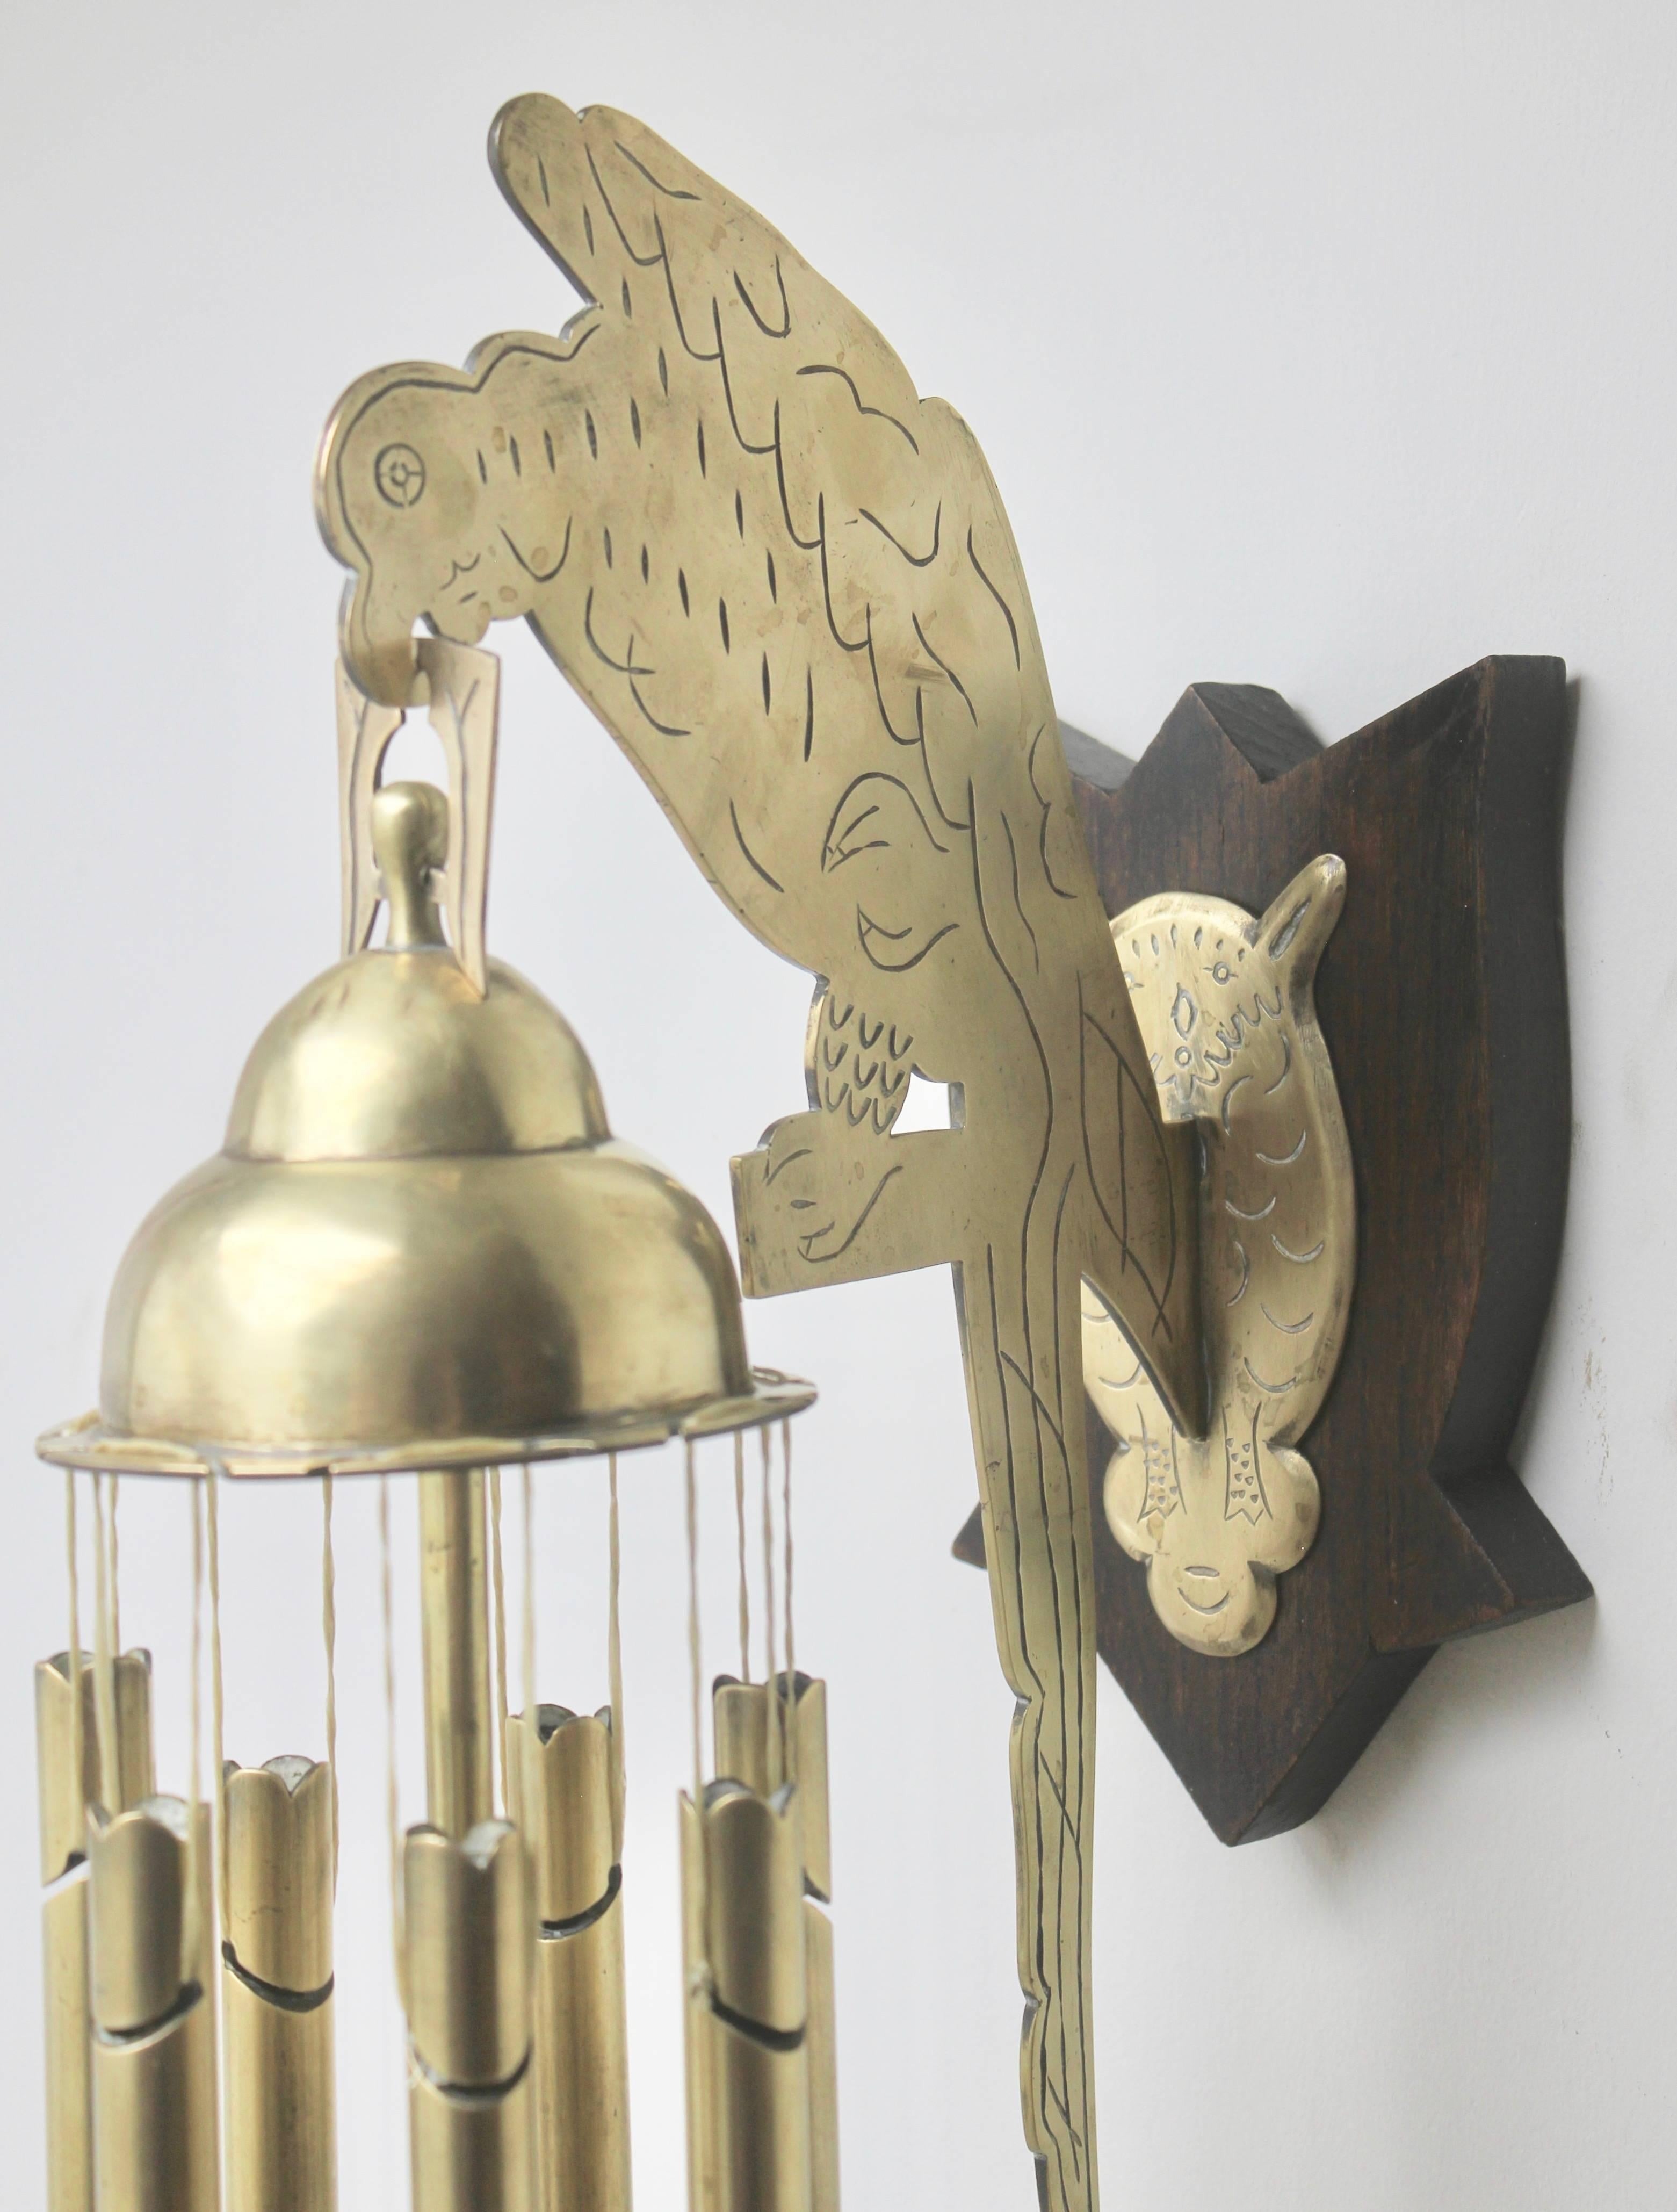 Austrian Arts & Crafts Chime Tubular Bells, Brass Wall-Mounted Dinner Gong ‘Doorbell’ For Sale